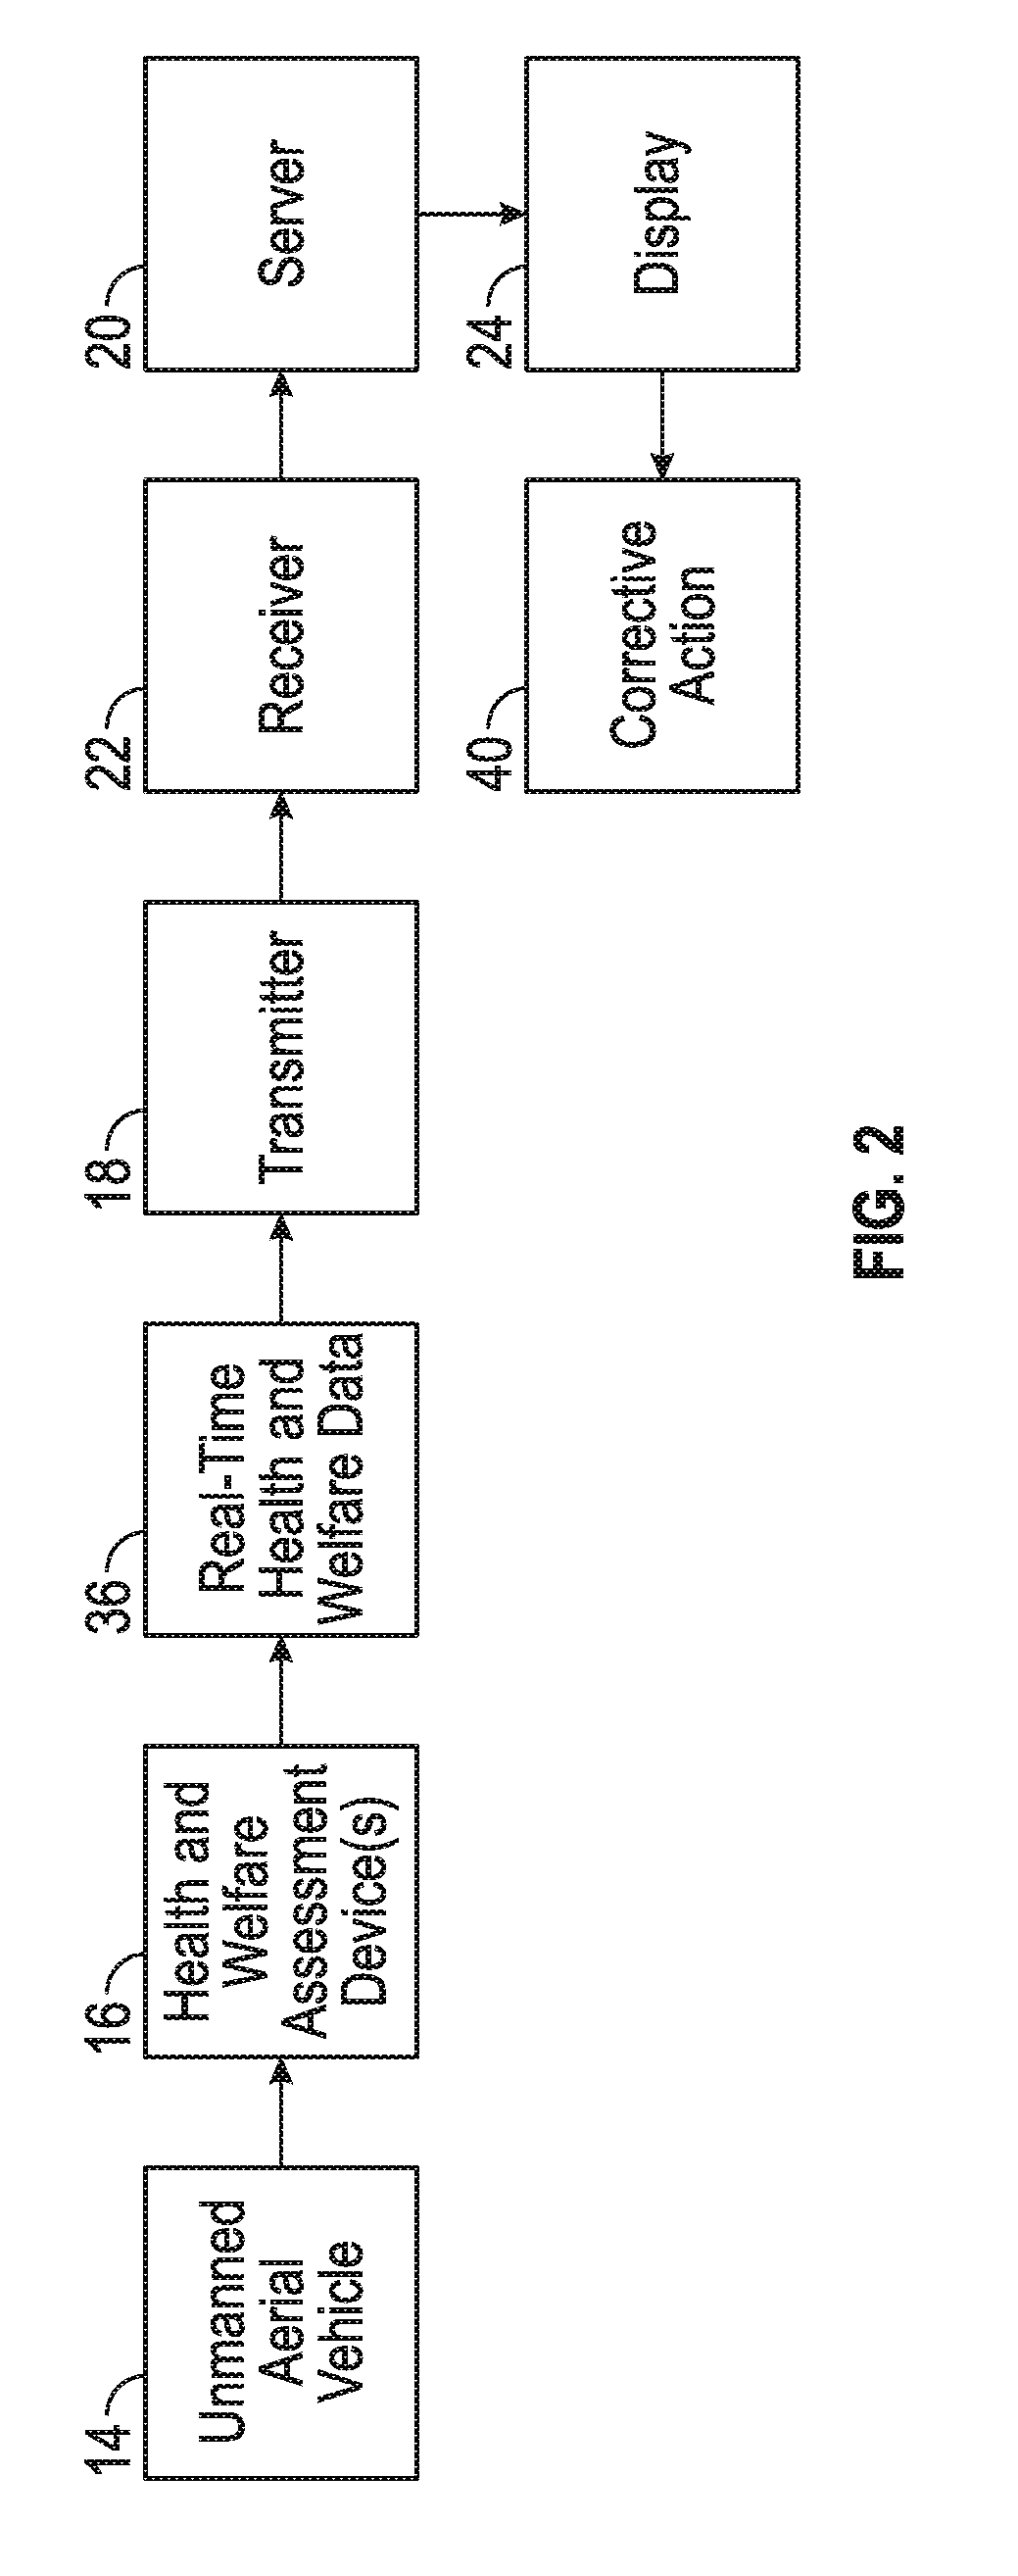 Unmanned livestock monitoring system and methods of use